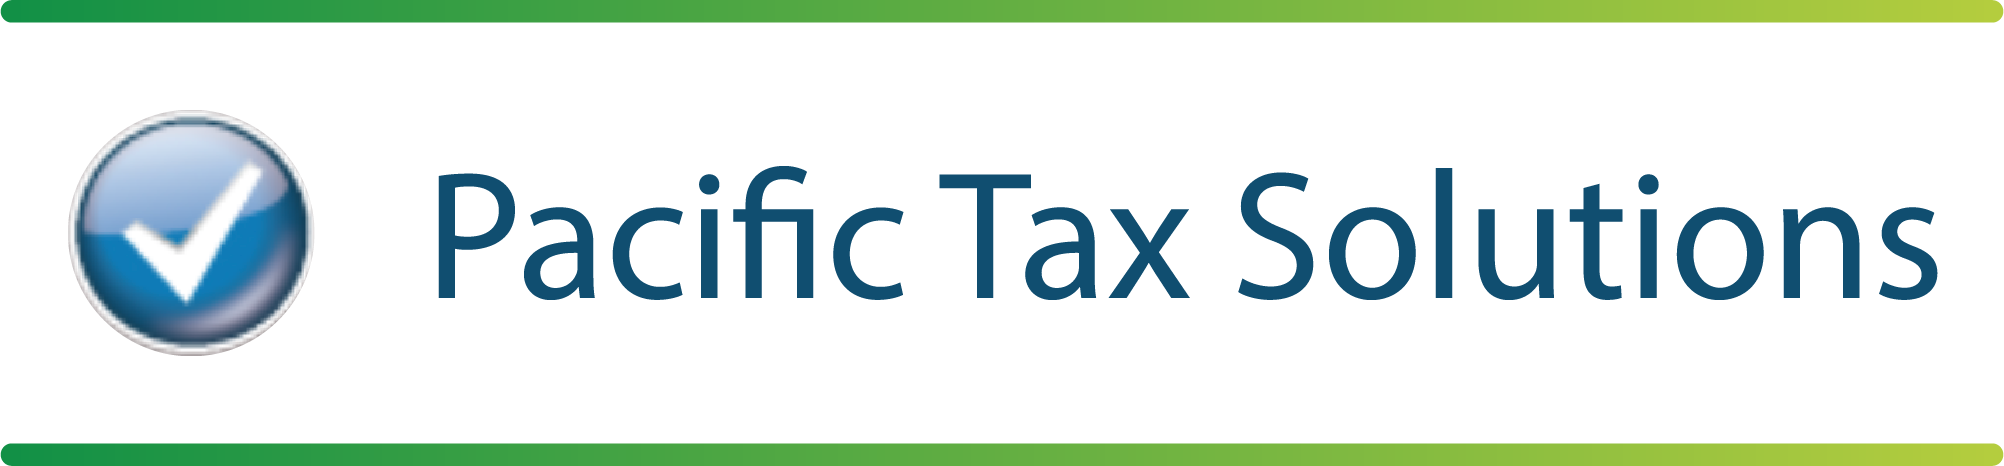 Pacific Tax Solutions